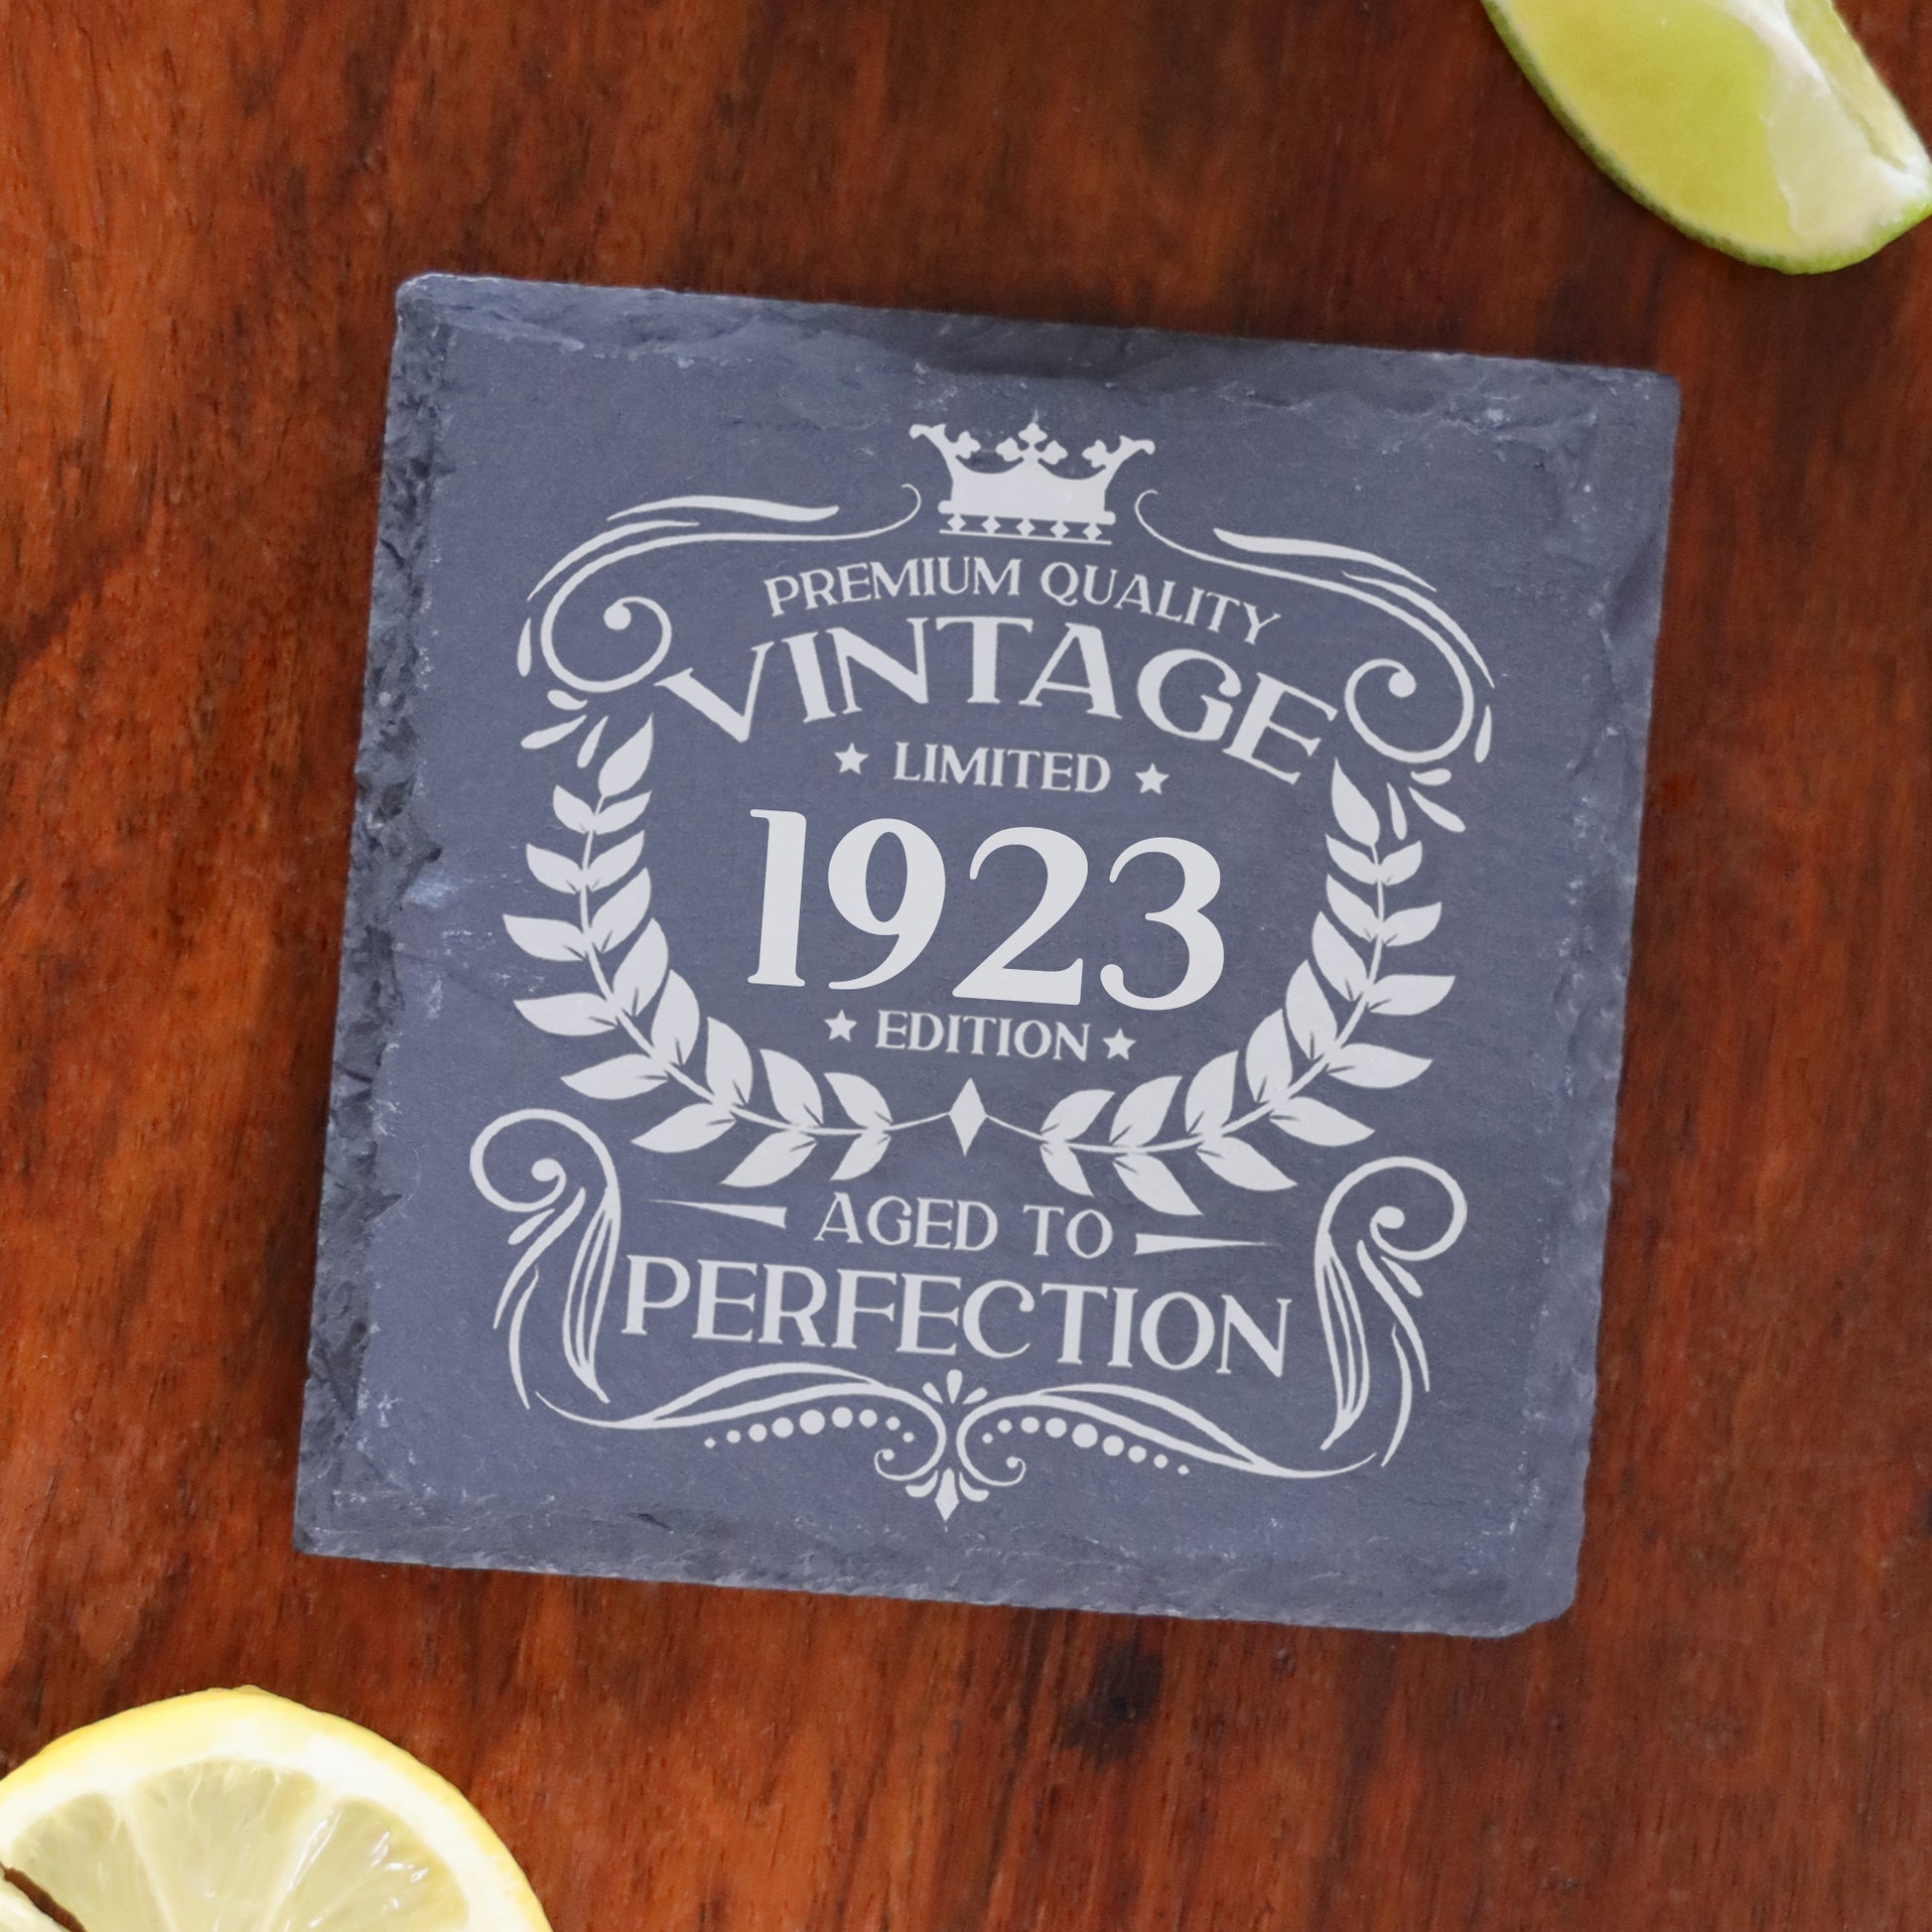 Vintage 1923 100th Birthday Engraved Gin Glass Gift  - Always Looking Good - Square Coaster Only  